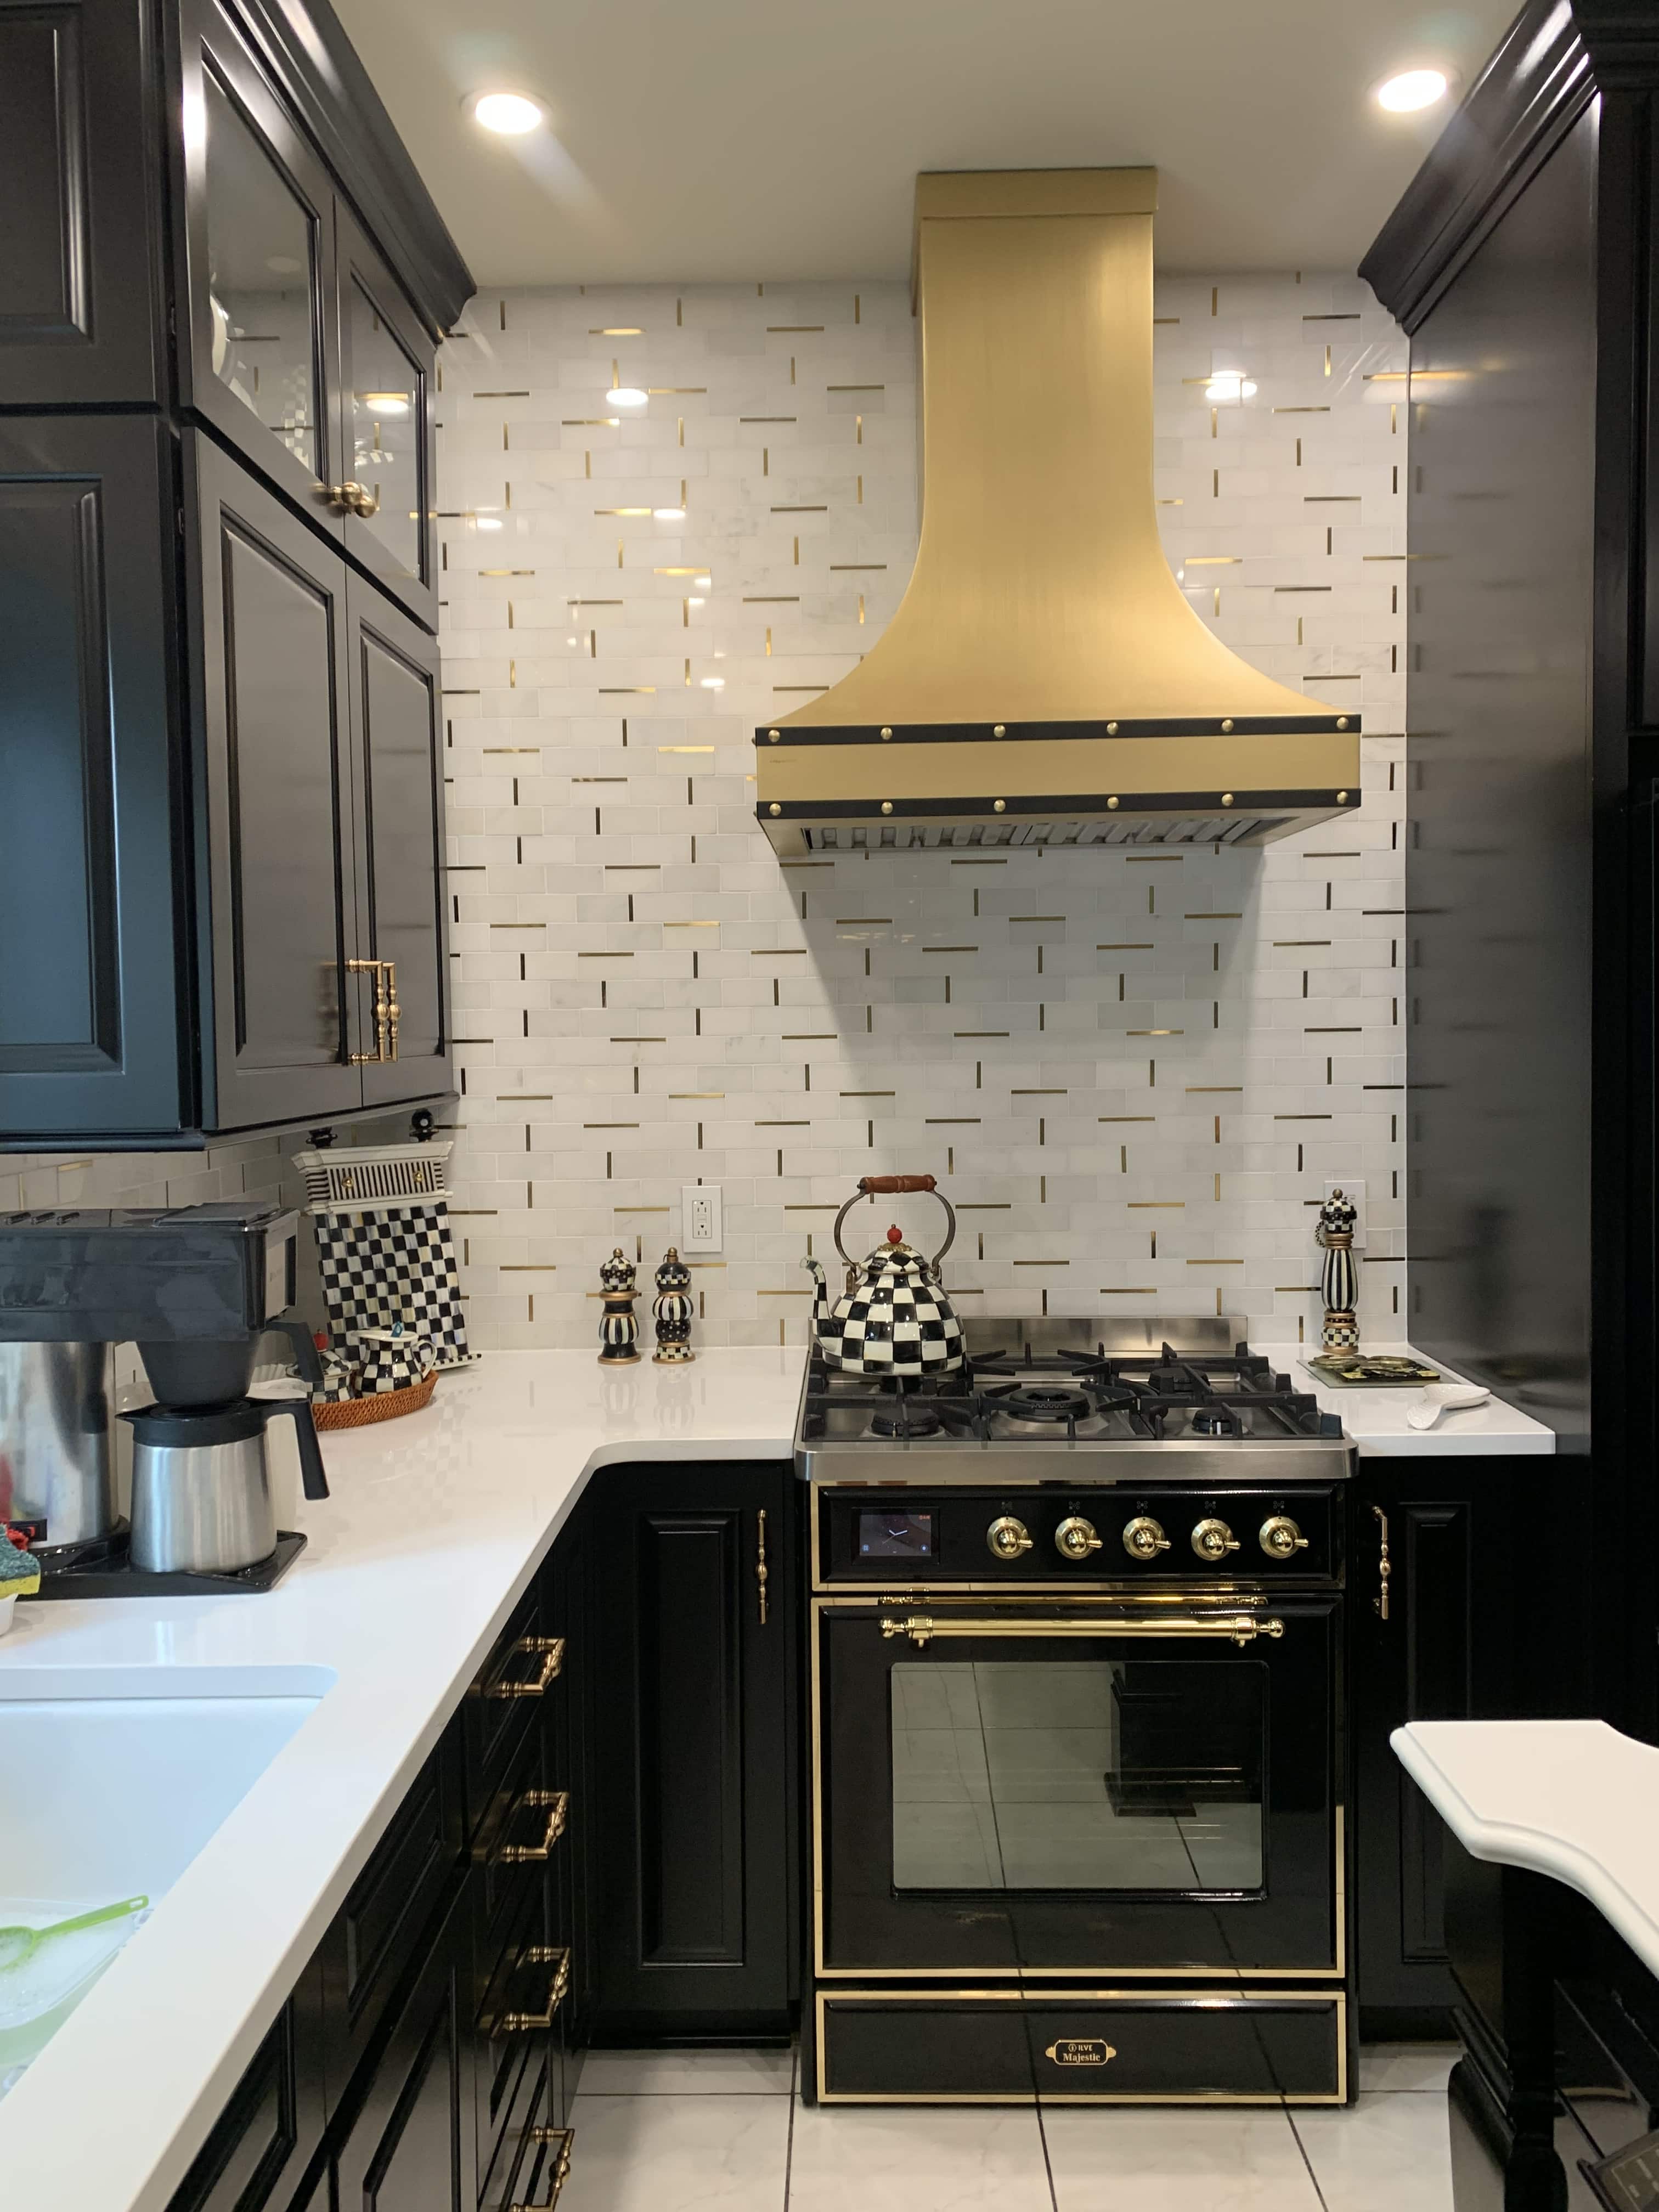 CopperSmith Euro ES3 Matte Brass Kitchen Range Hood with Black Enamel Straps in cottage style features black cabinets white countertops and white tile backsplash